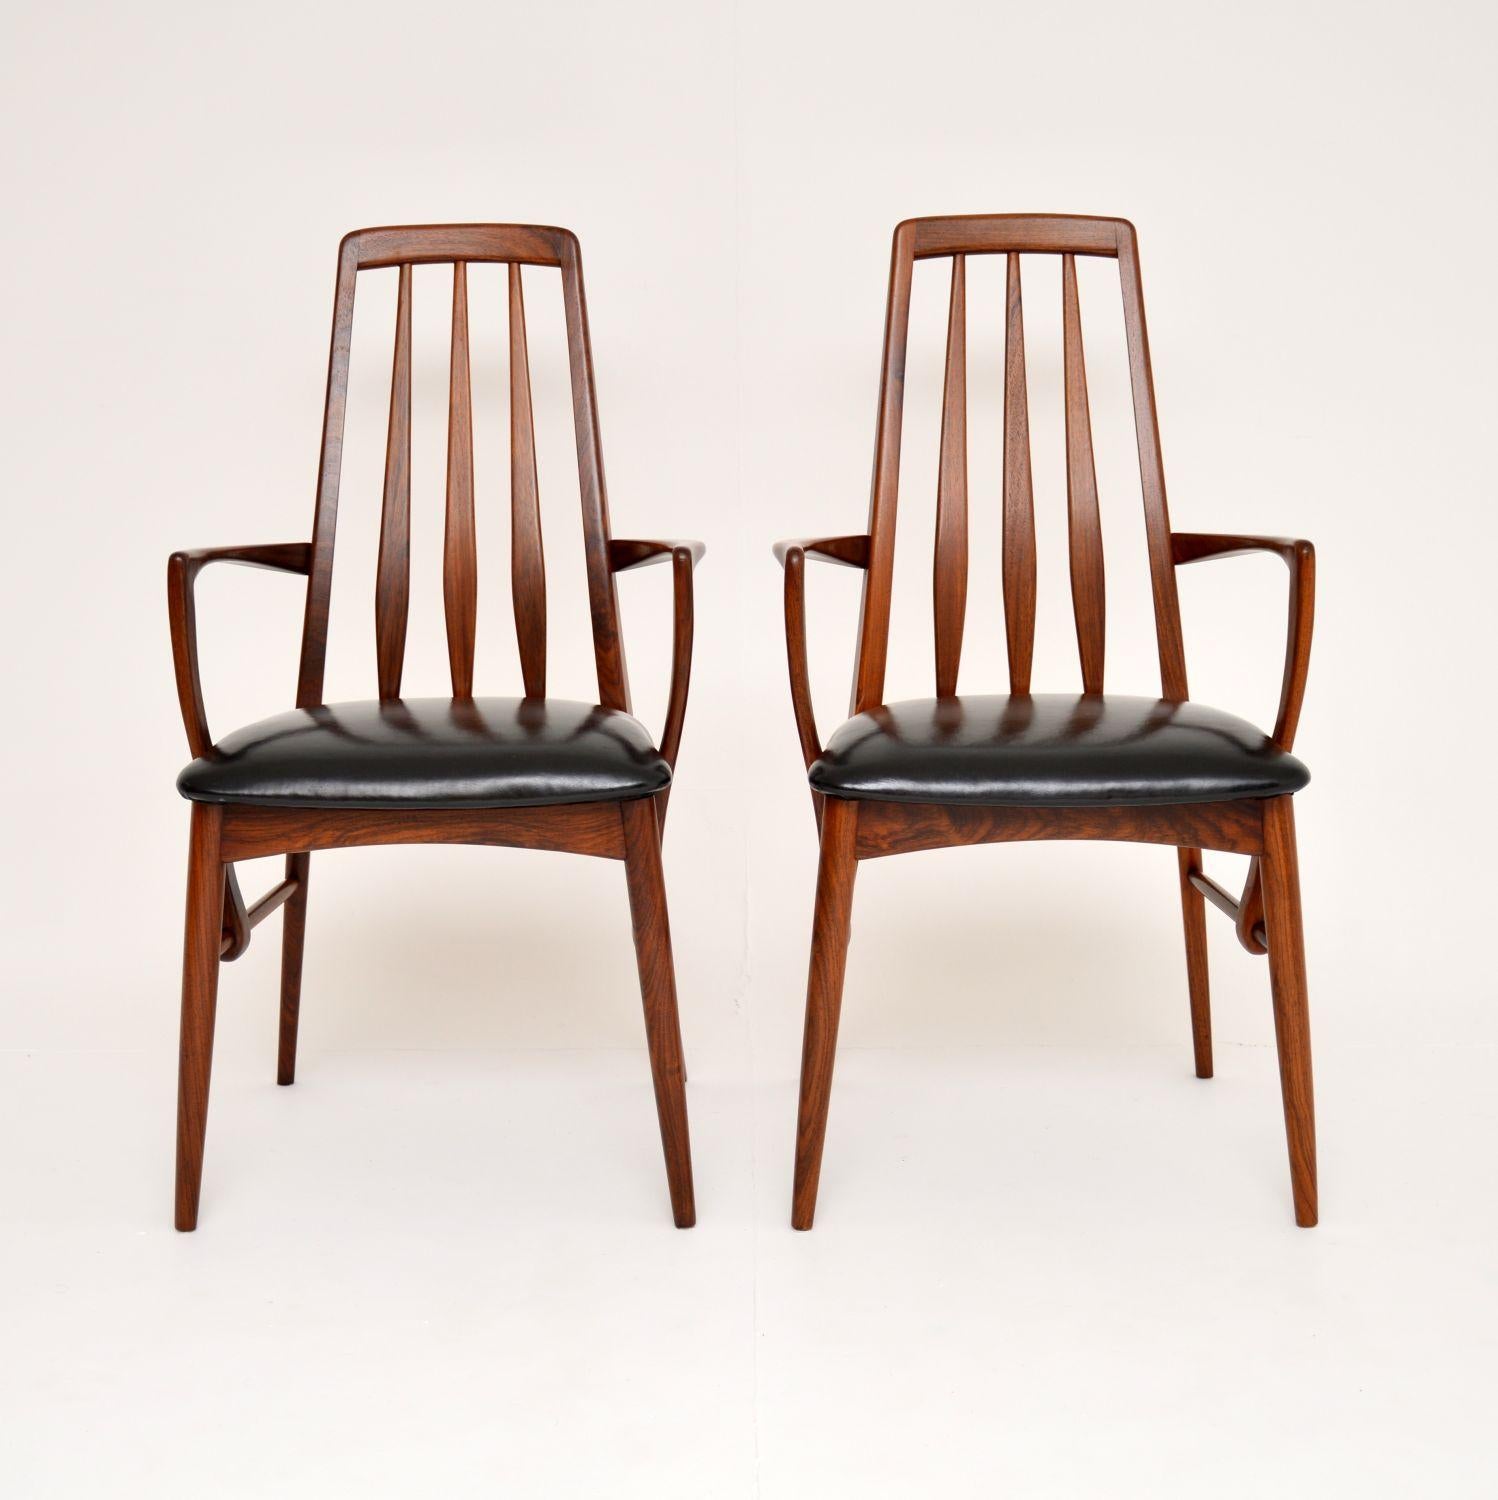 A stylish and beautifully made pair of solid rosewood ‘Eva’ carver chairs. These were designed by Niels Koefoed for Koefoeds Hornslet, they date from the 1960-70’s.

These are of amazing quality, with a sculptural and organic design. The condition